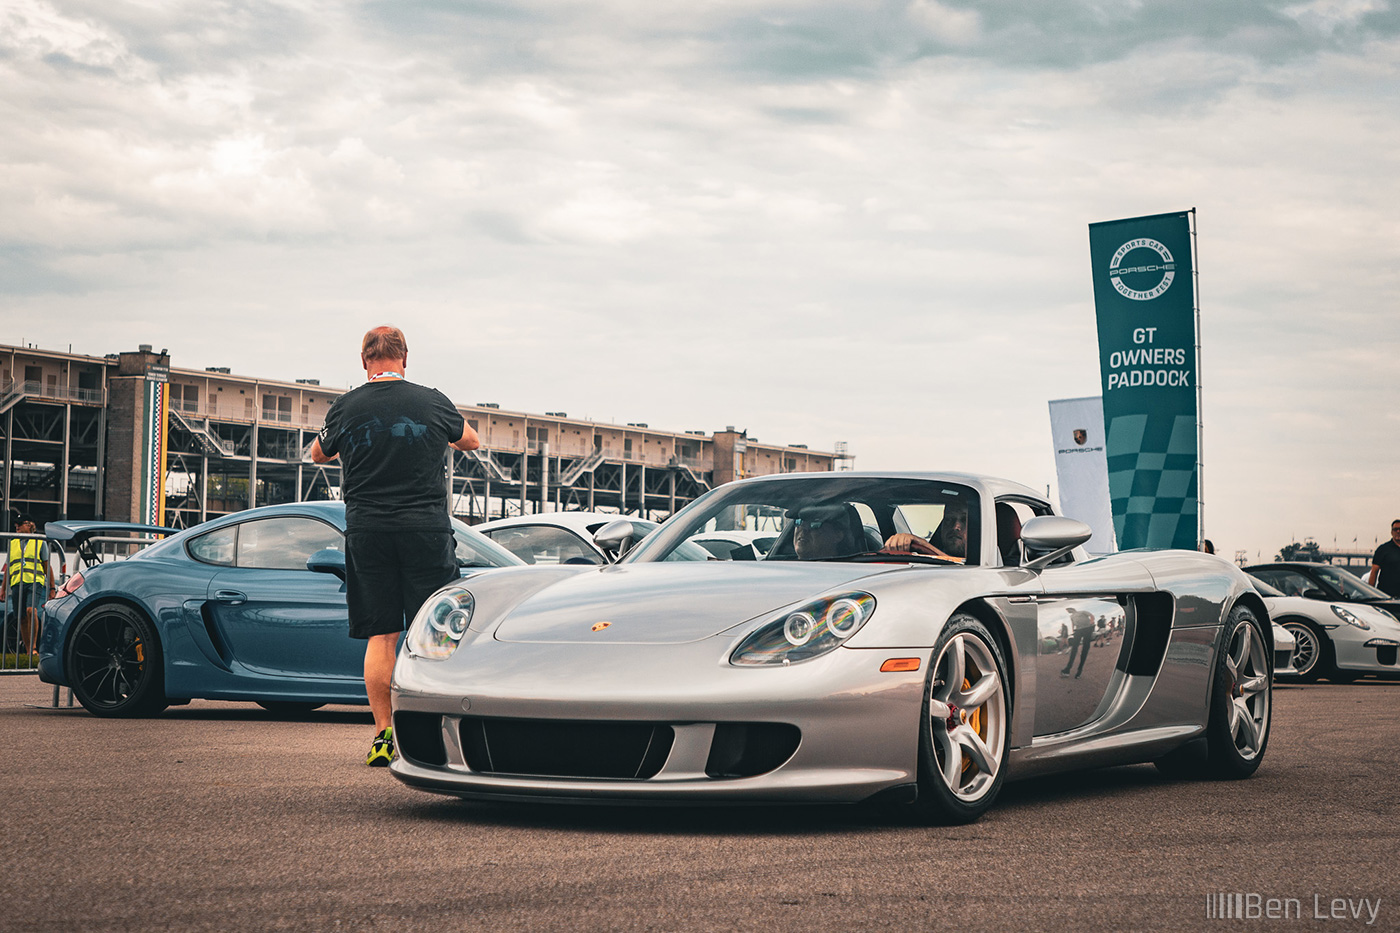 Silver Porsche Carrera GT at Sports Car Together Fest in Indy